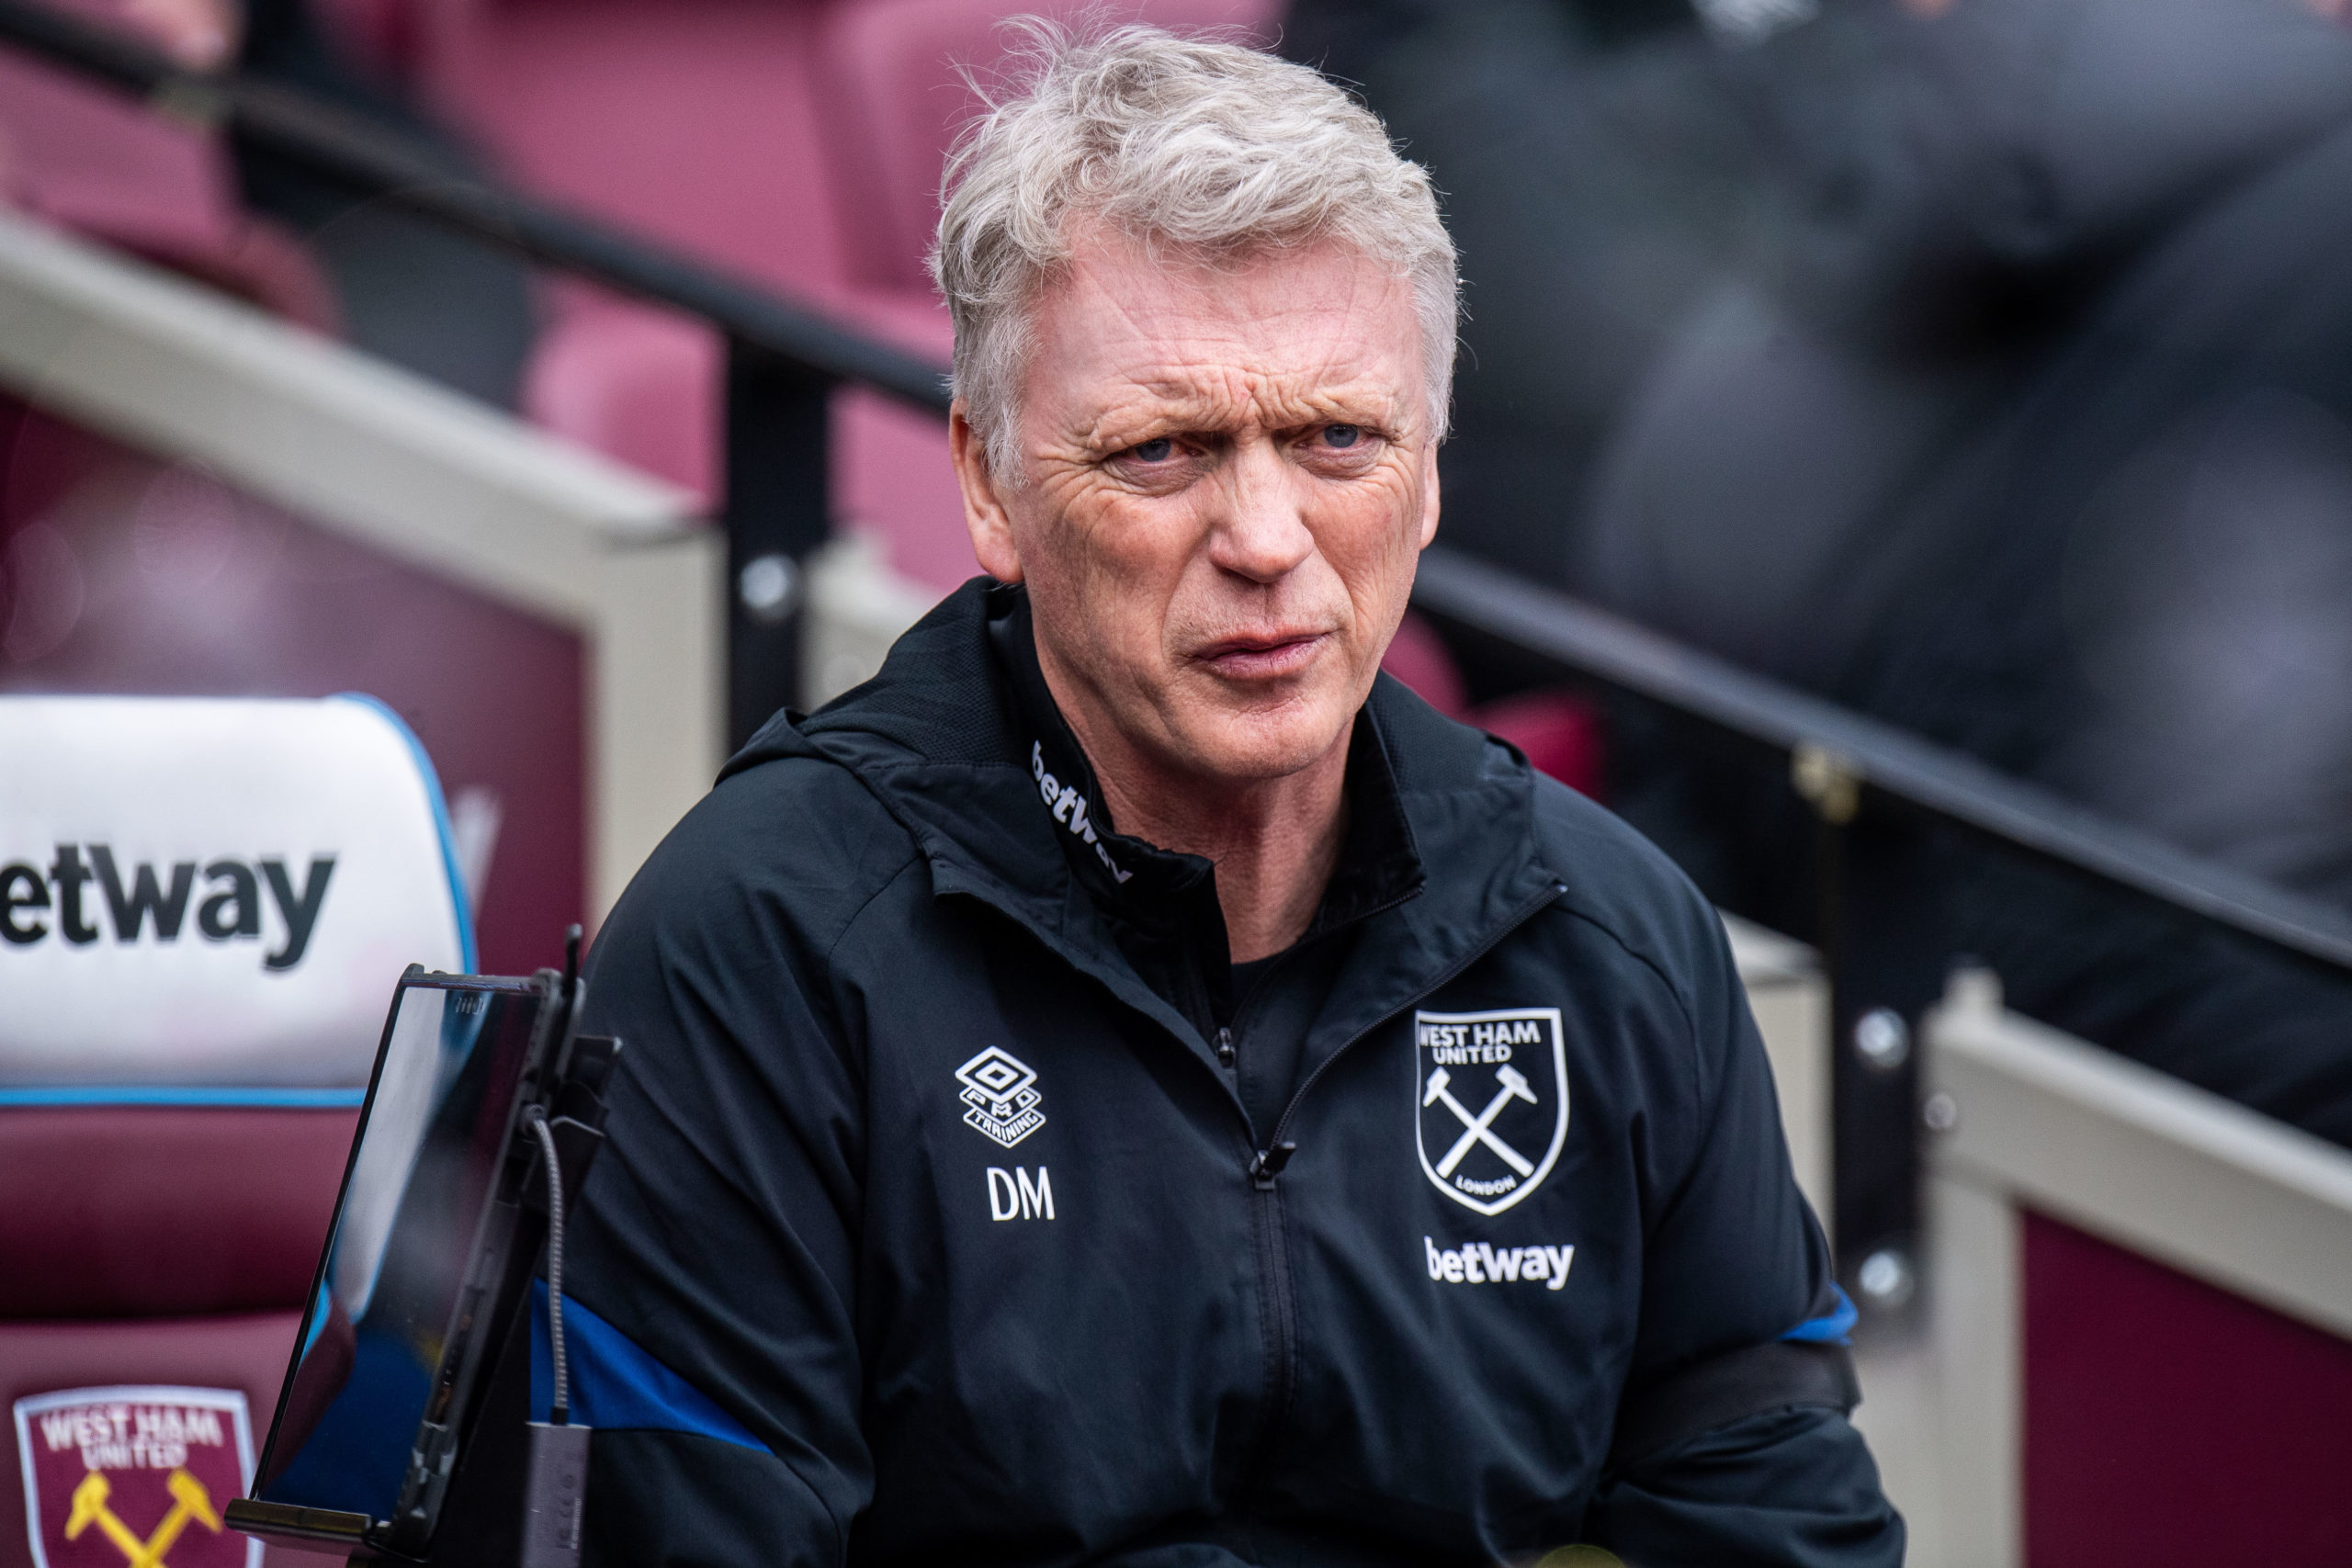 David Moyes says his transfer plans will mean a lot more competition for one West Ham star in particular next season